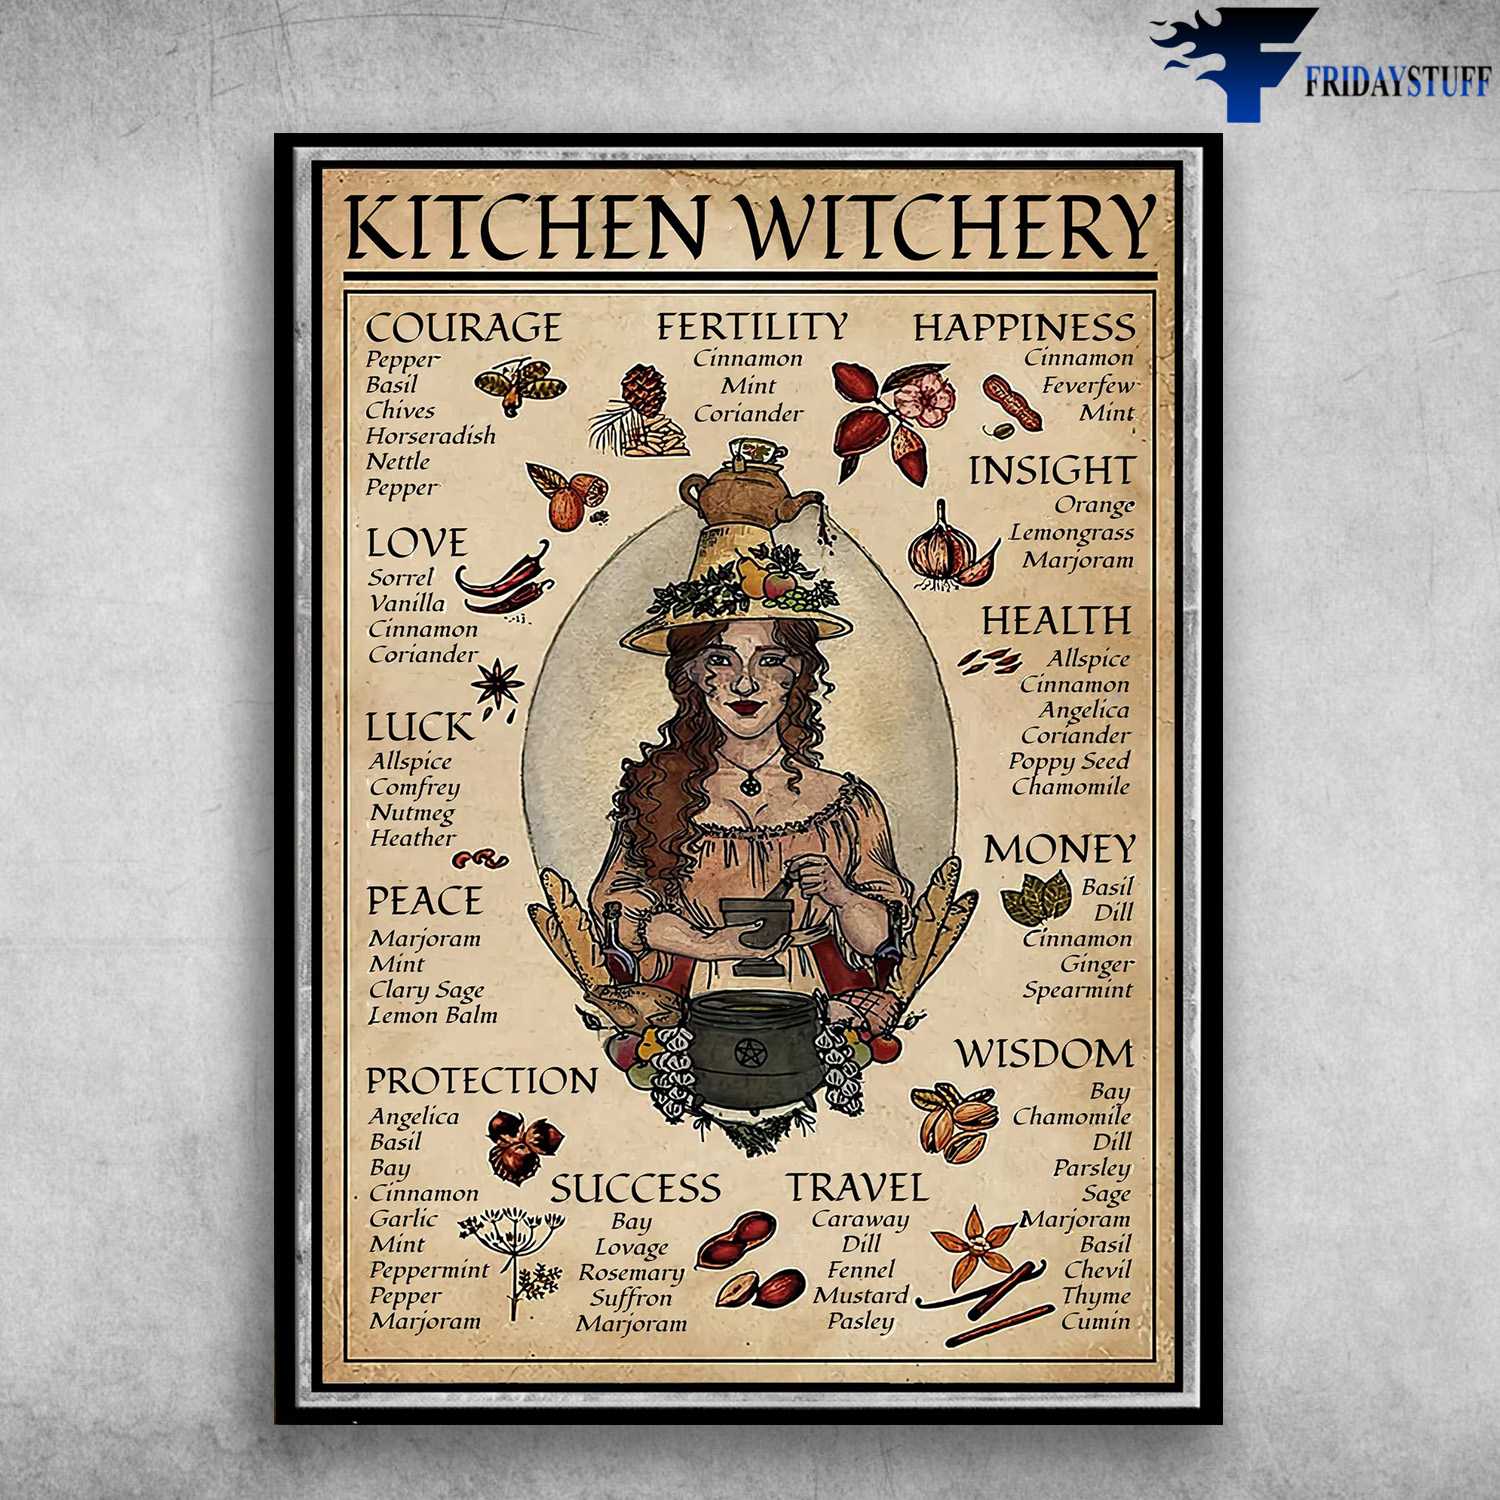 Kitchen Witchery, Witch Poster, Kitchen Decor, Courage, Fertility, Wisdom, Insight, Happiness, Money, Travel, Success, Peace, Luck